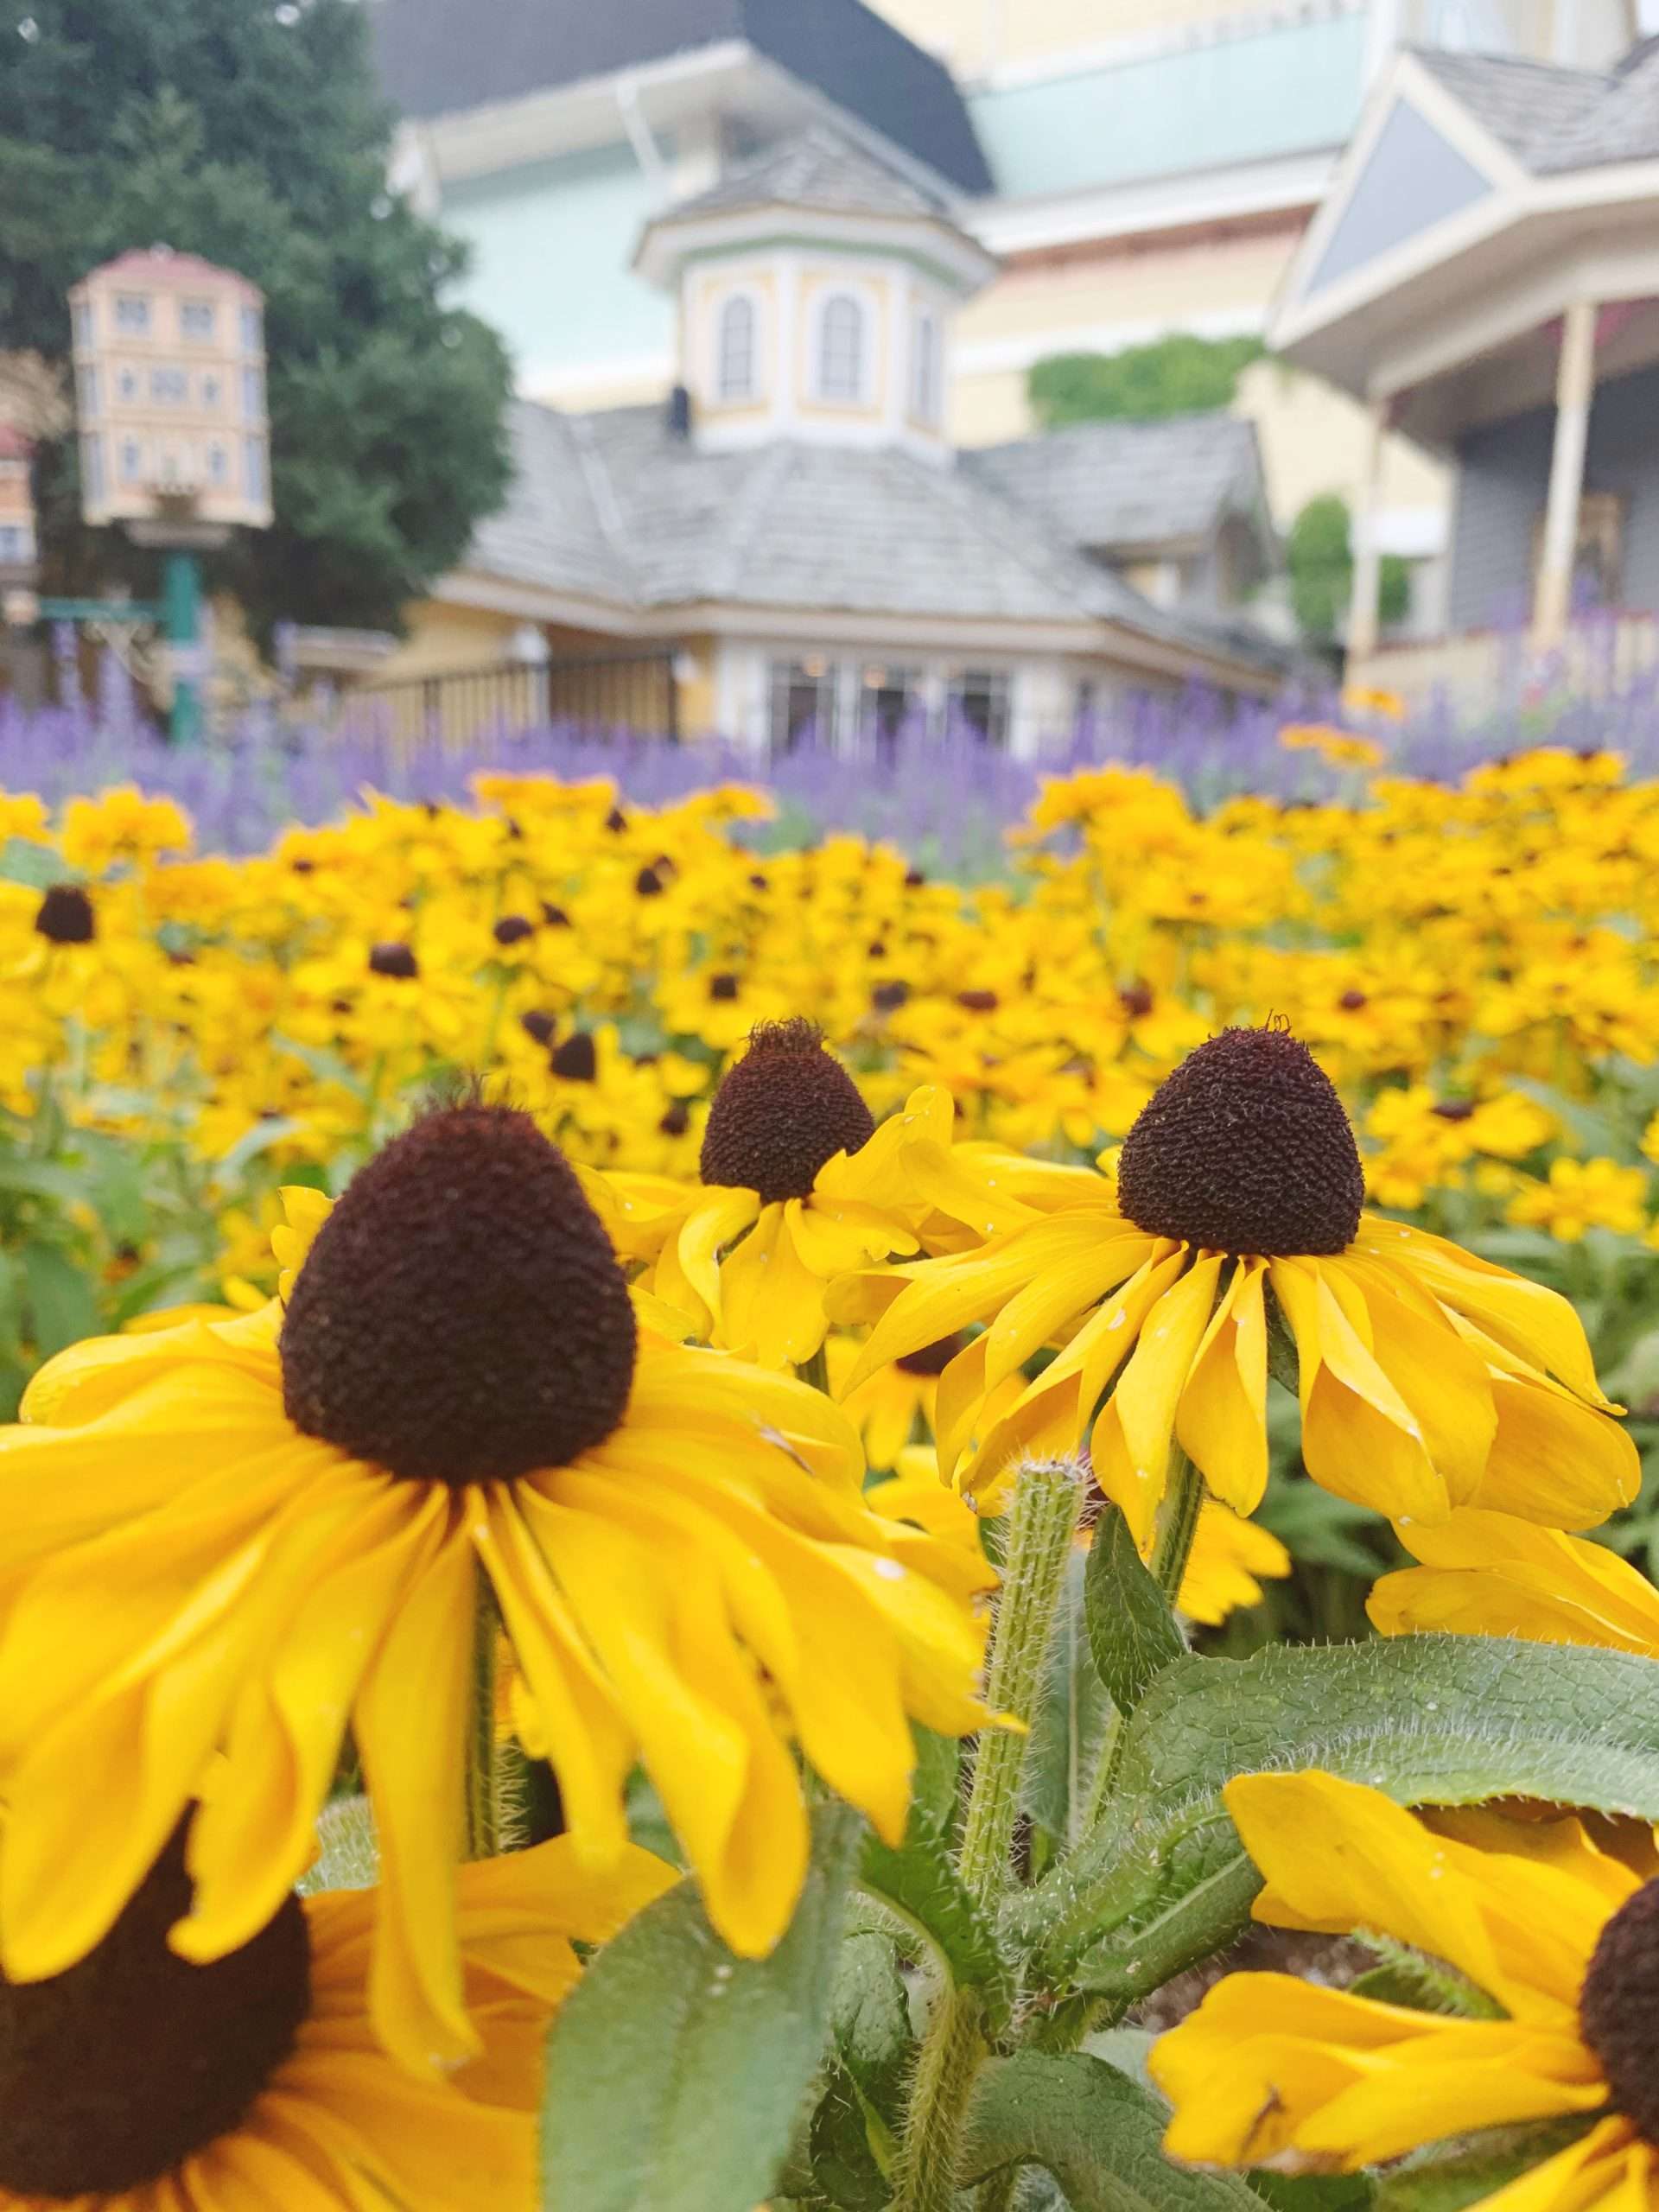 Flowers at Dollywood in Pigeon Forge, Tennessee